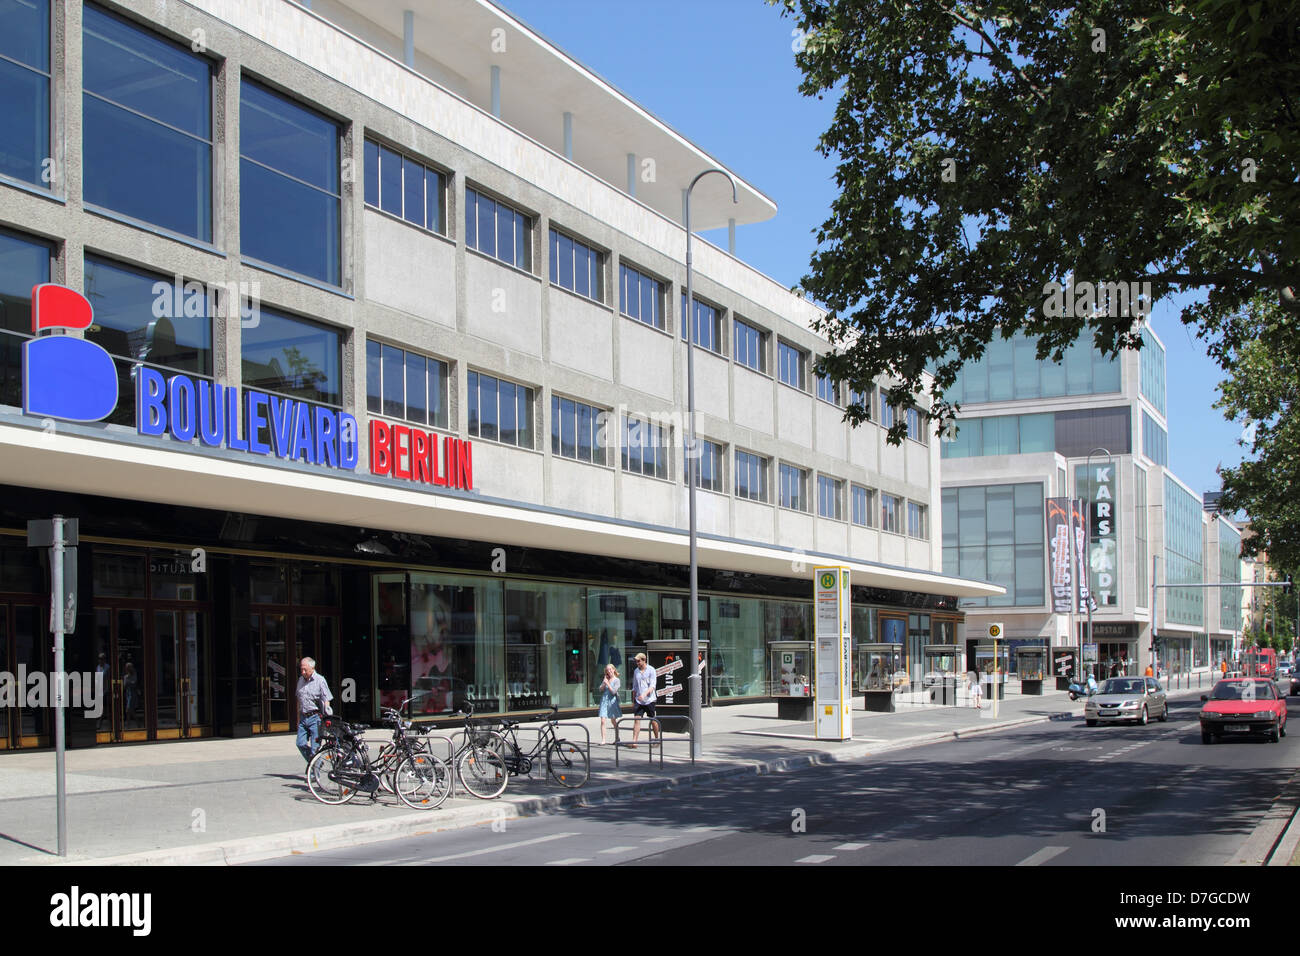 Schlossstrasse Steglitz Berlin High Resolution Stock Photography and Images  - Alamy